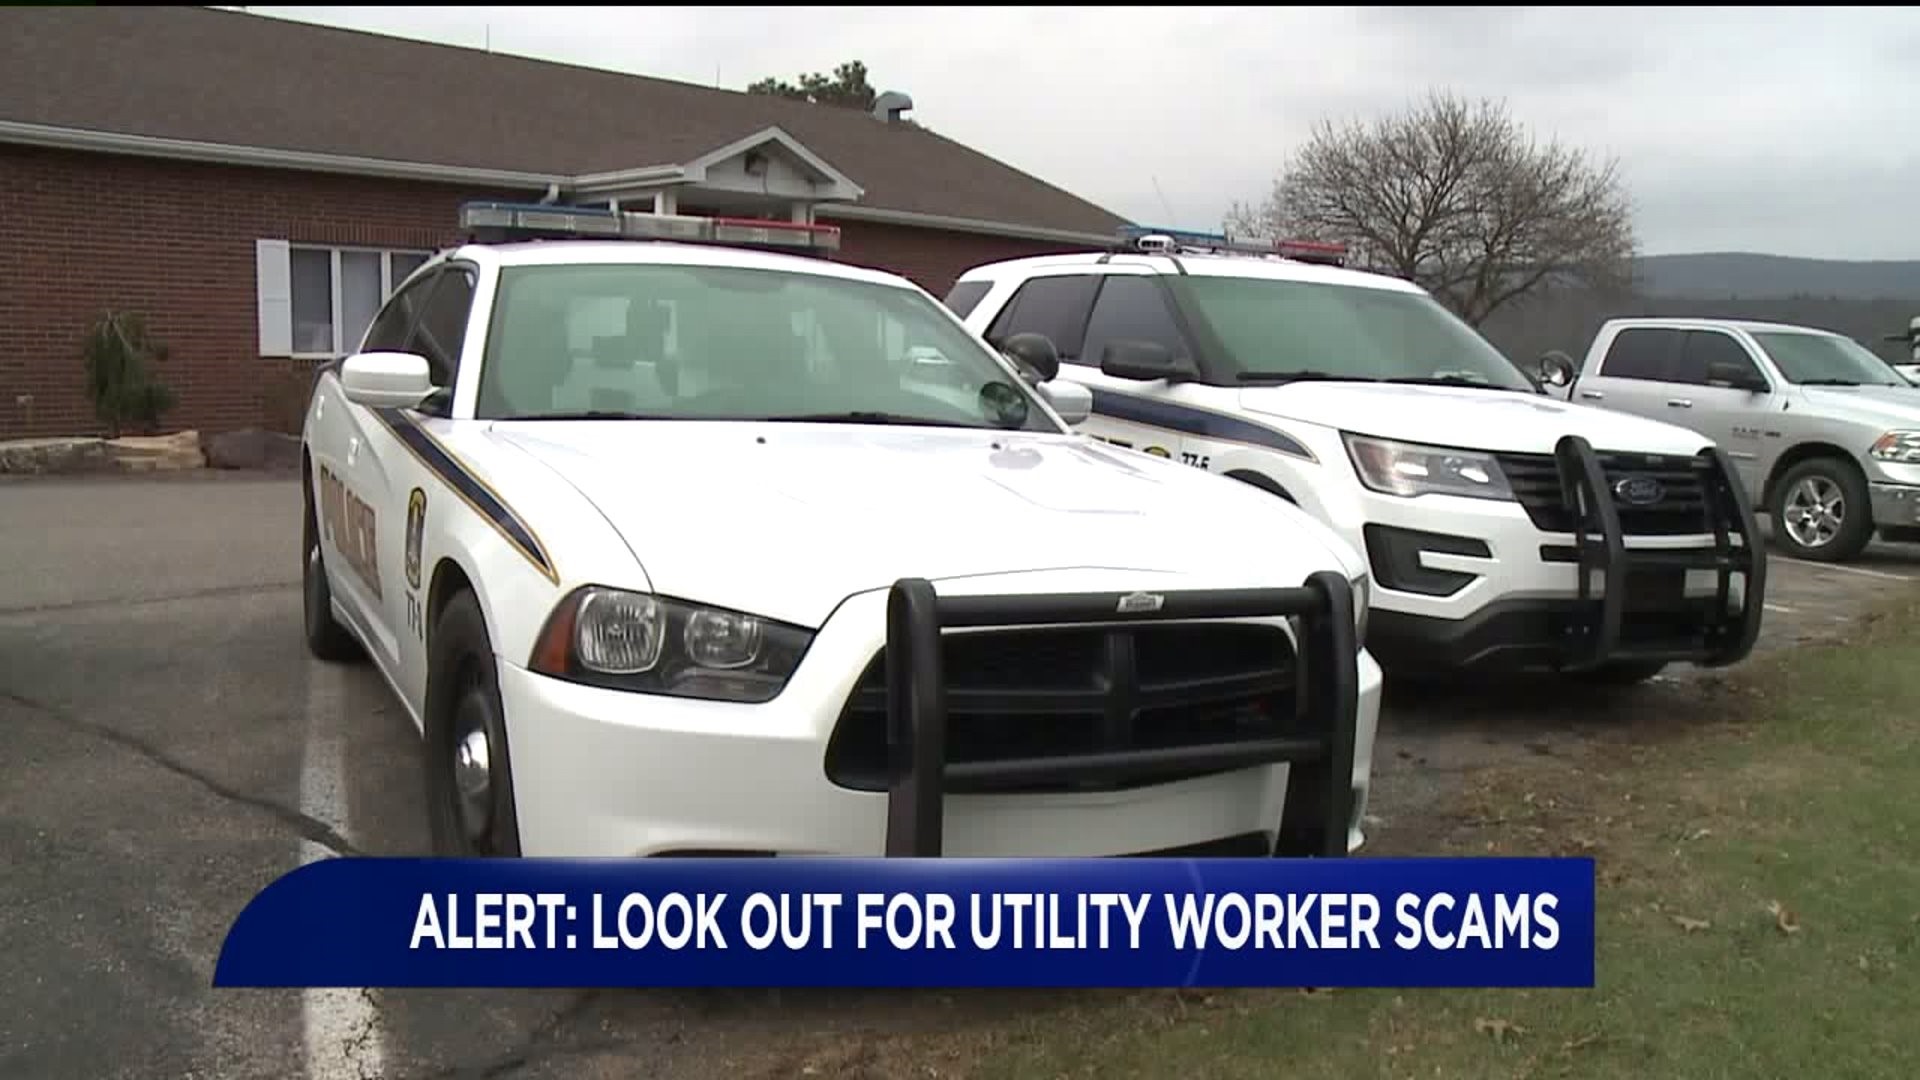 Police: Look Out for Utility Worker Scams